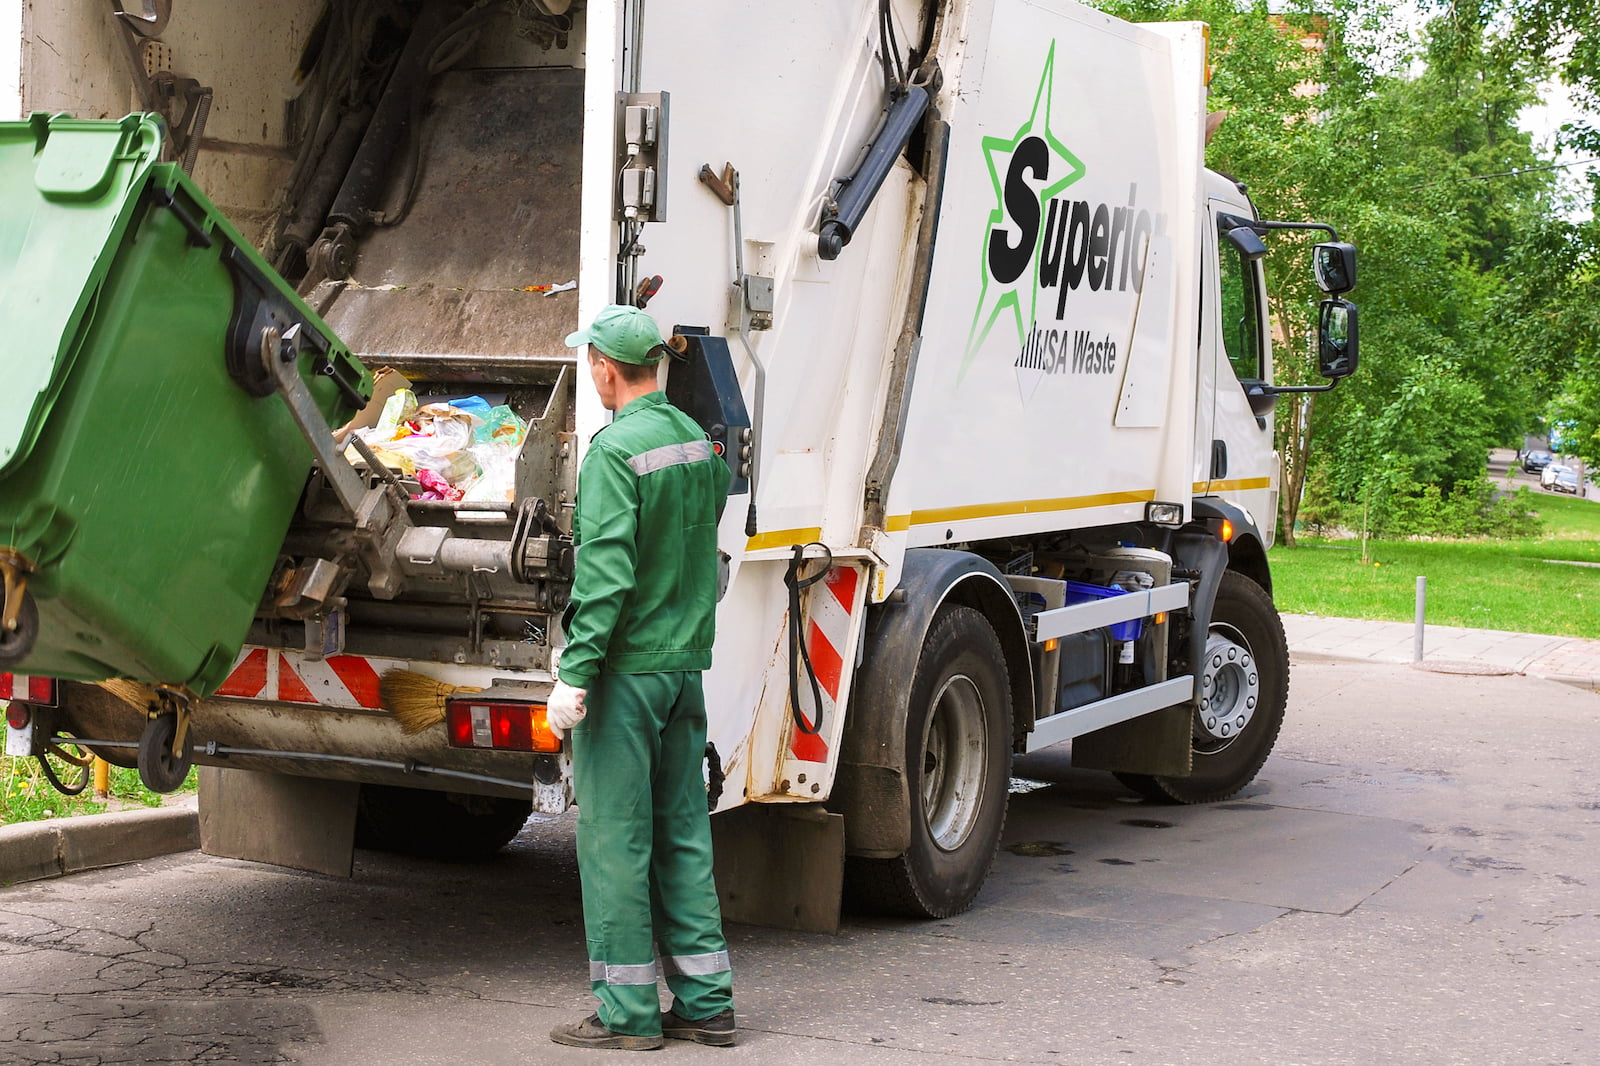 Superior USA Waste Acquires Central Disposal